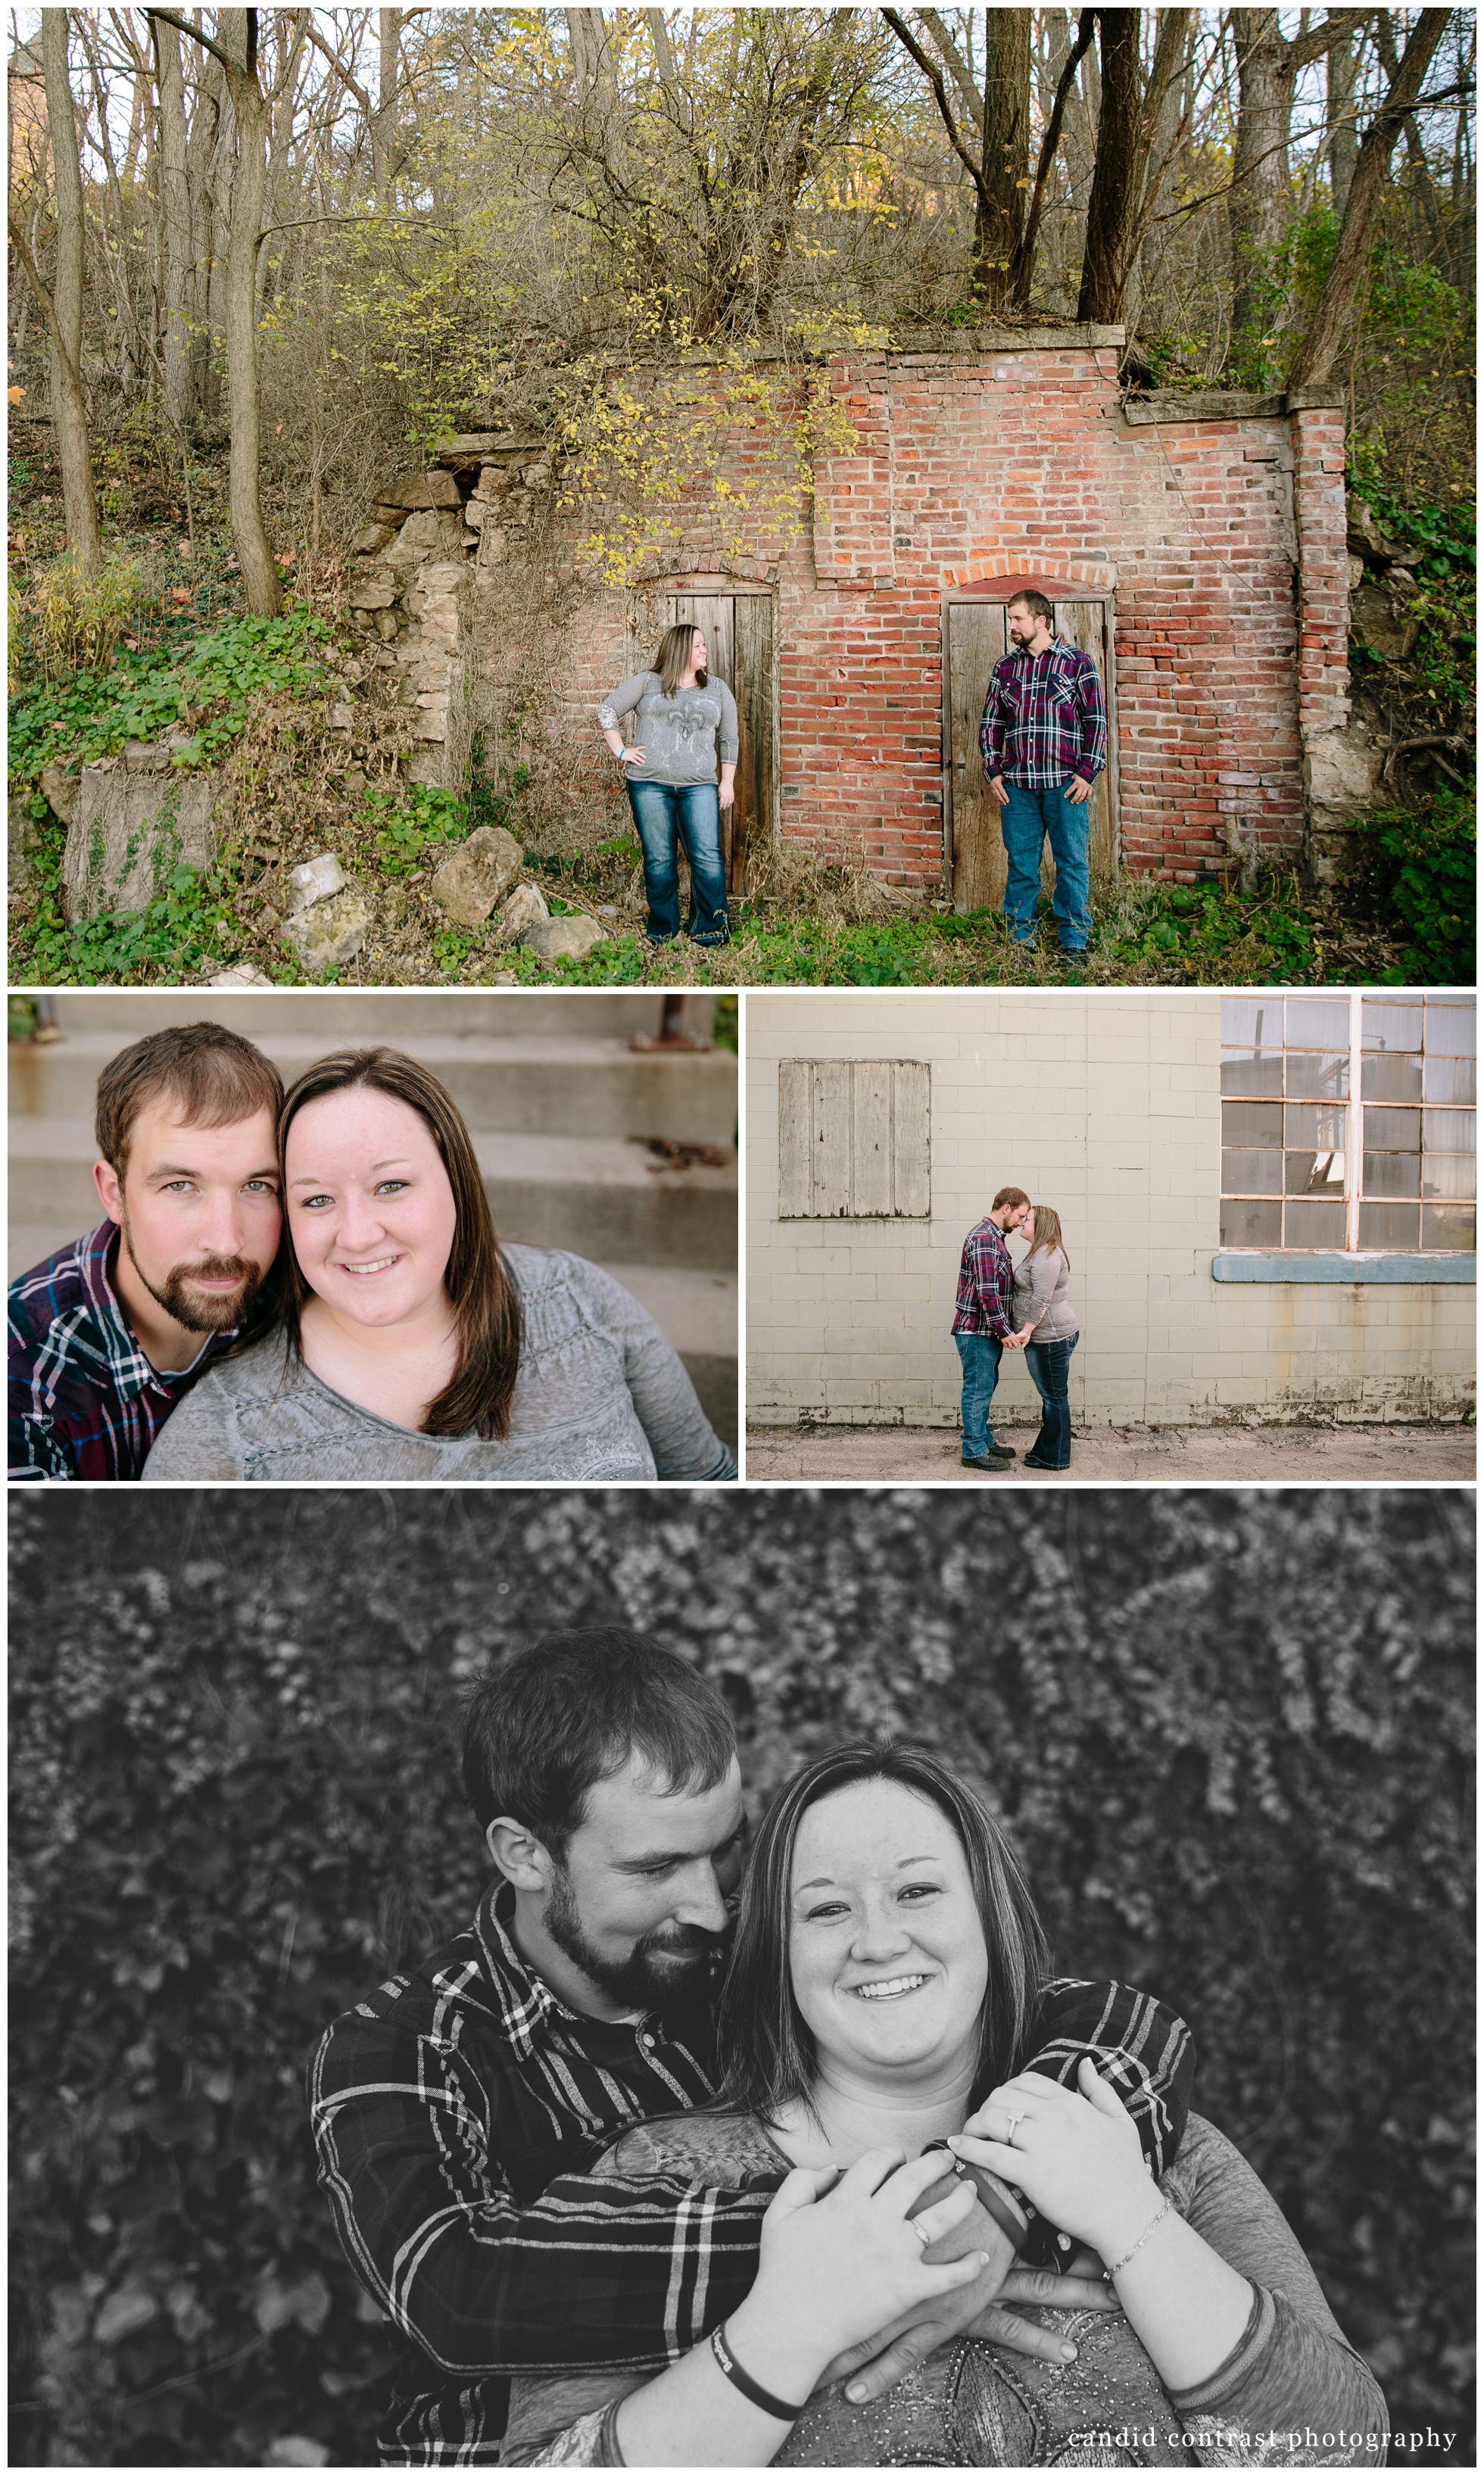 Galena Illinois engagement session, Galena wedding photographer, Candid contrast photography